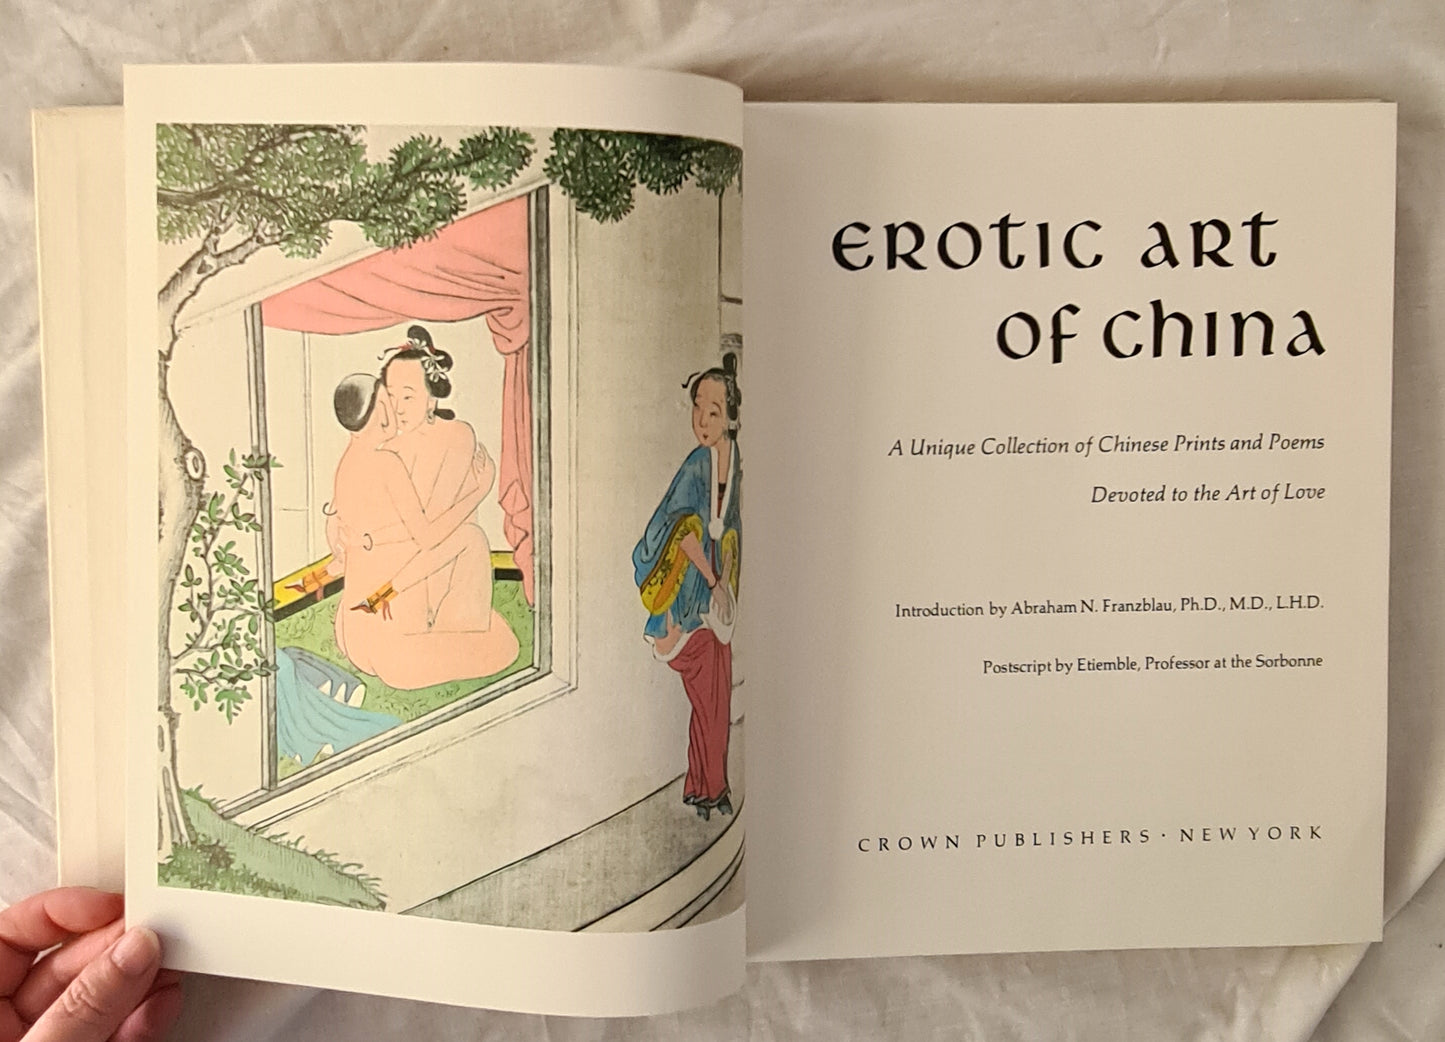 Erotic Art of China  A Unique Collection of Chinese Prints and Poems Devoted to the Art of Love  Introduction by Abraham N. Franzblau